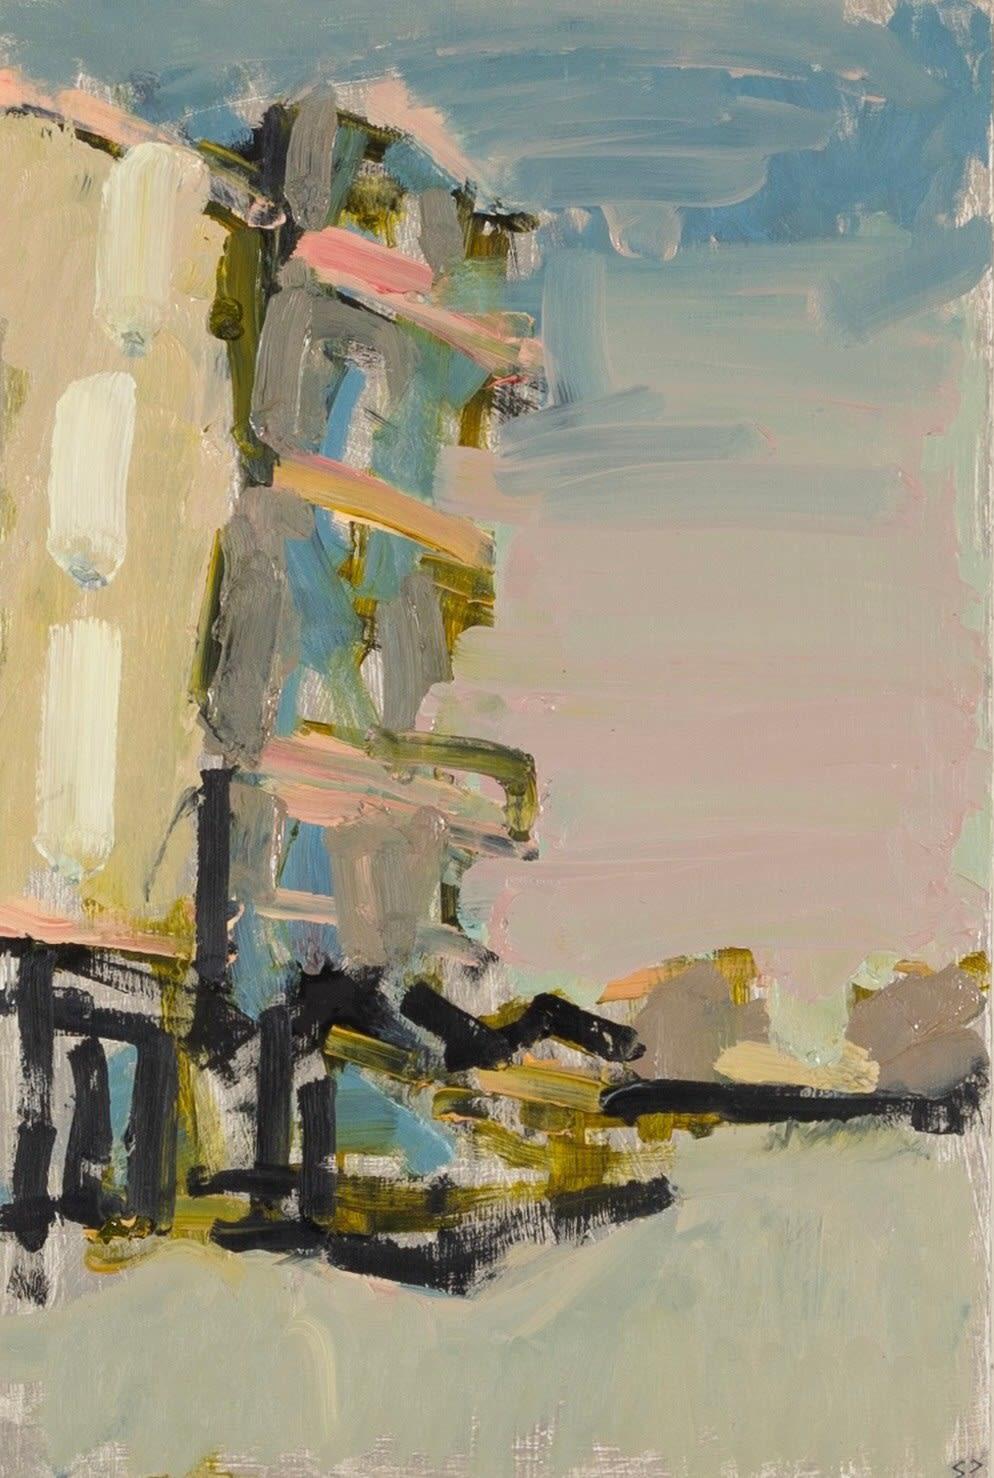 Unknown Abstract Painting - La Rochelle (Hôtel, Quai Duperré), Oil on Board Painting by Stephen Palmer, 2018